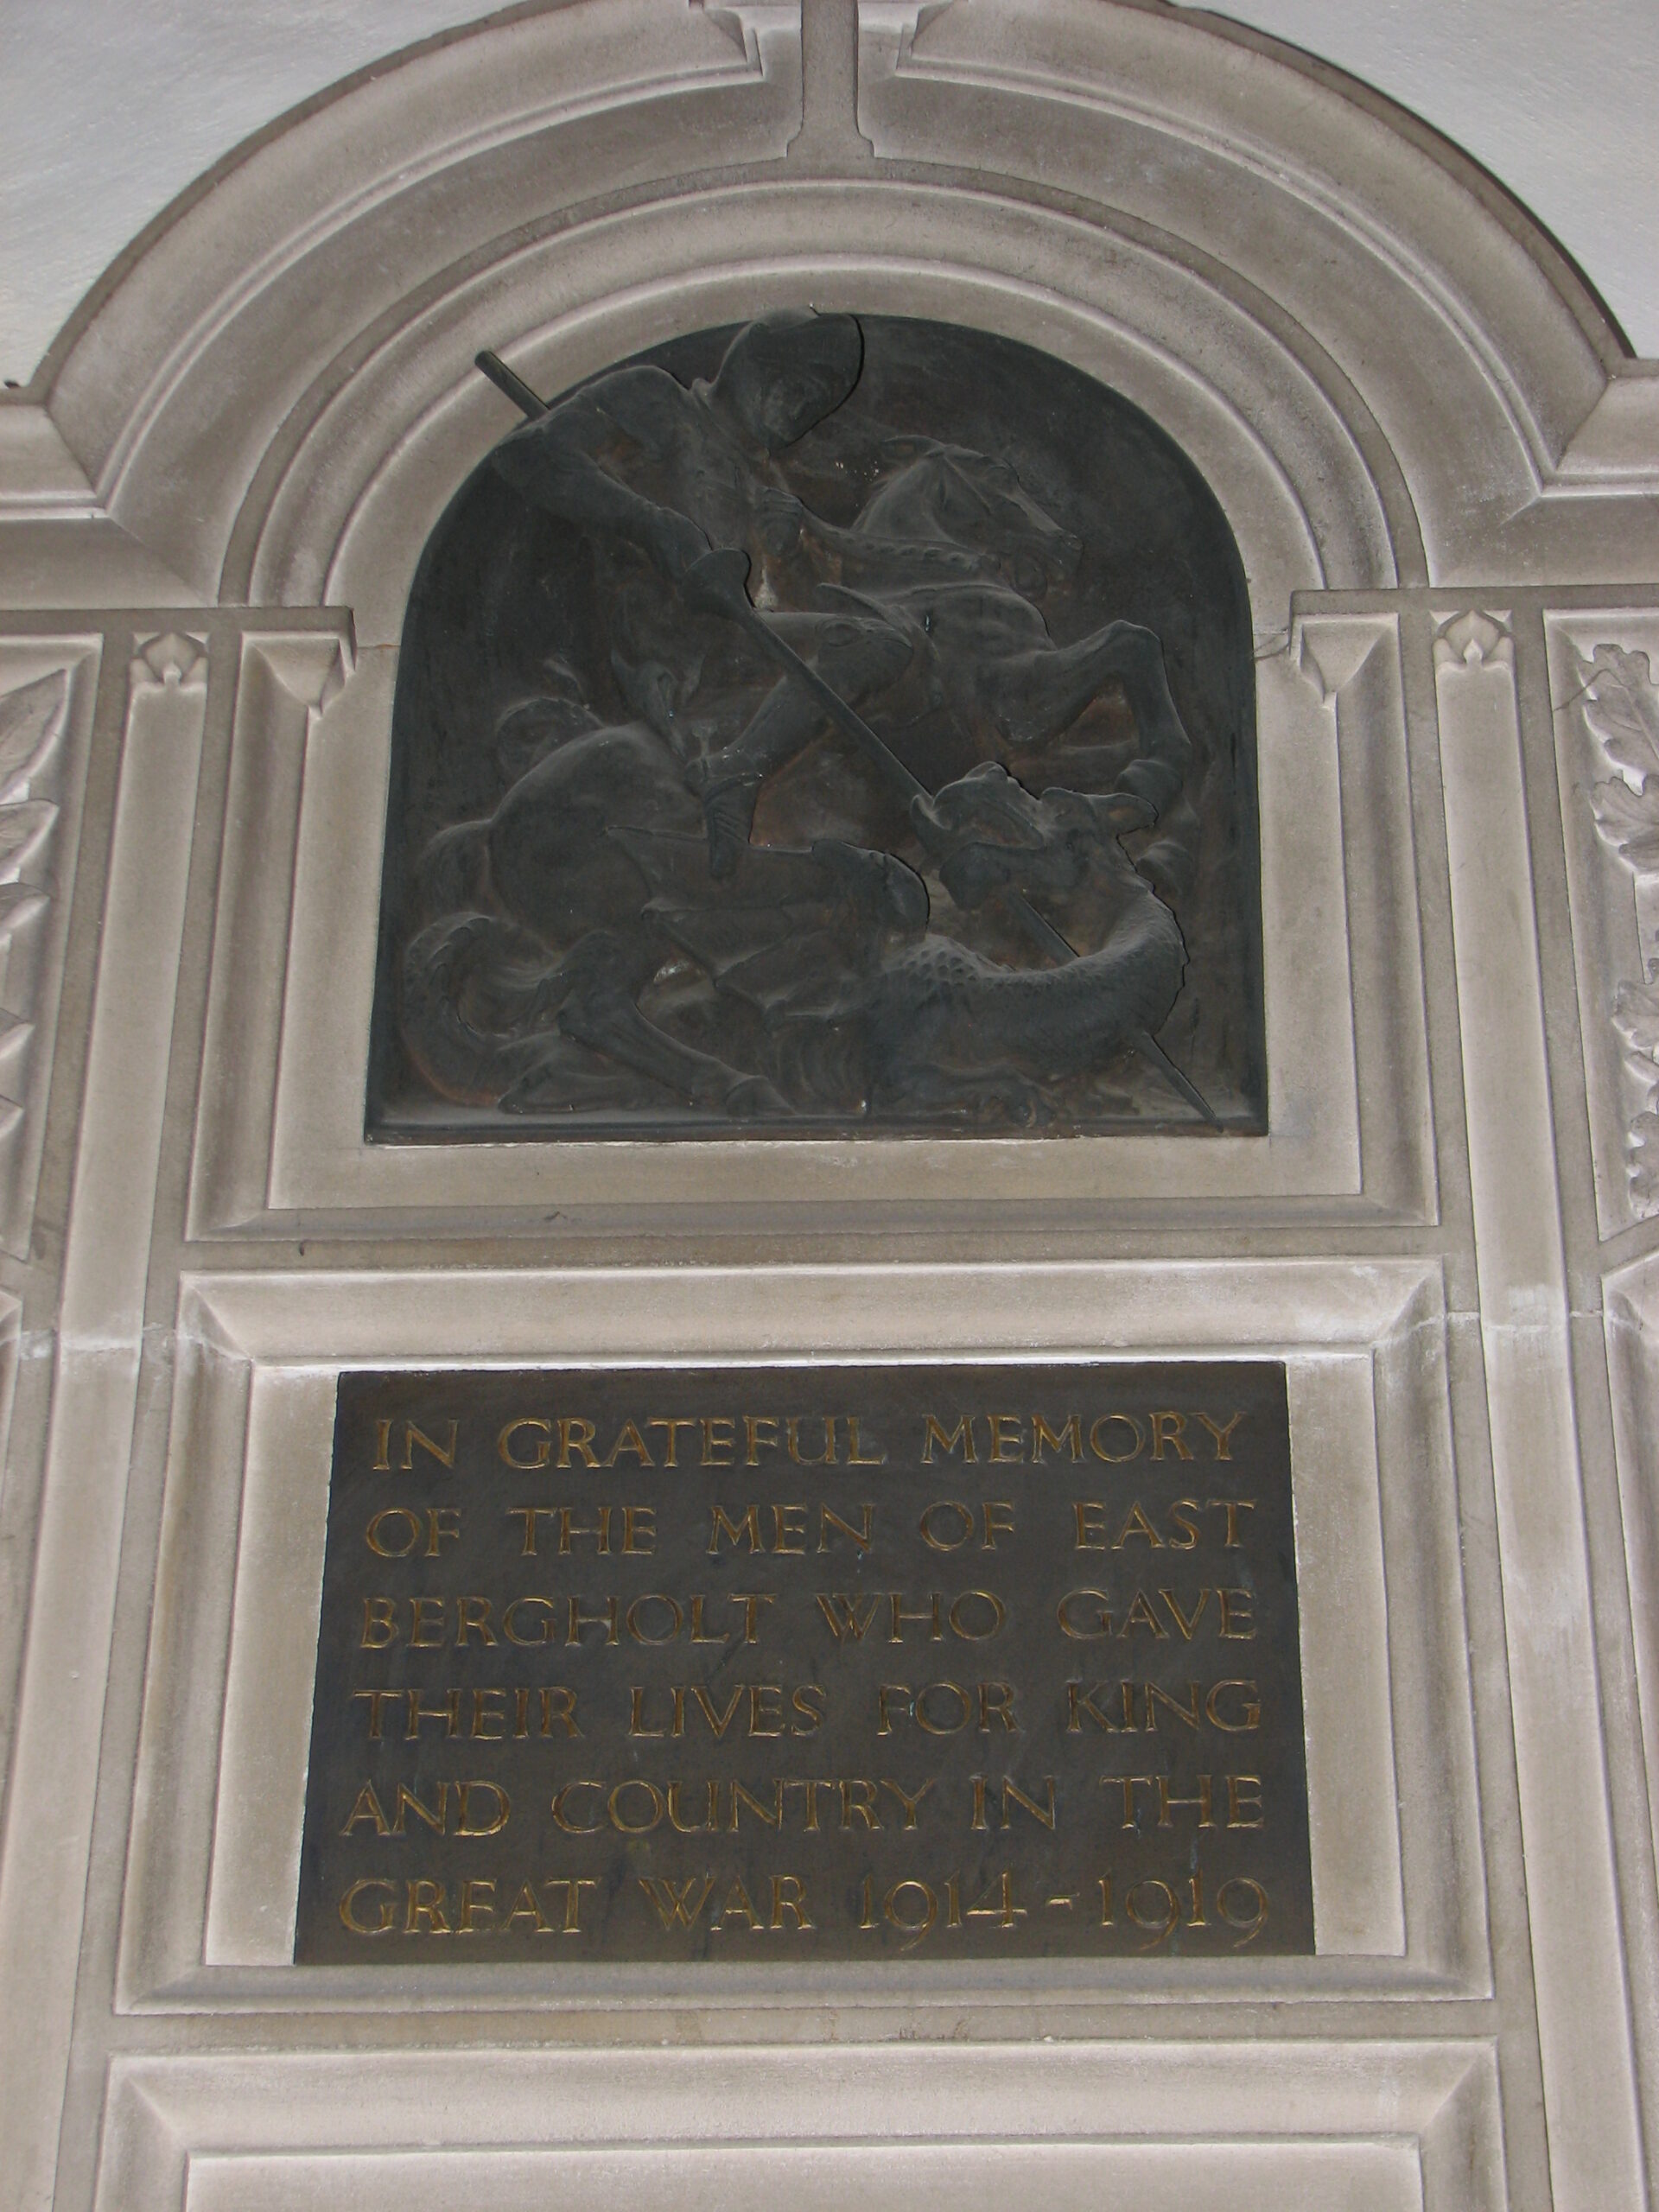 Bronze Bas Relief of St. George slaying the Dragon and the Dedication on the Village Memorial to the Fallen of The Great War<br>St. Mary's Church<br />MA